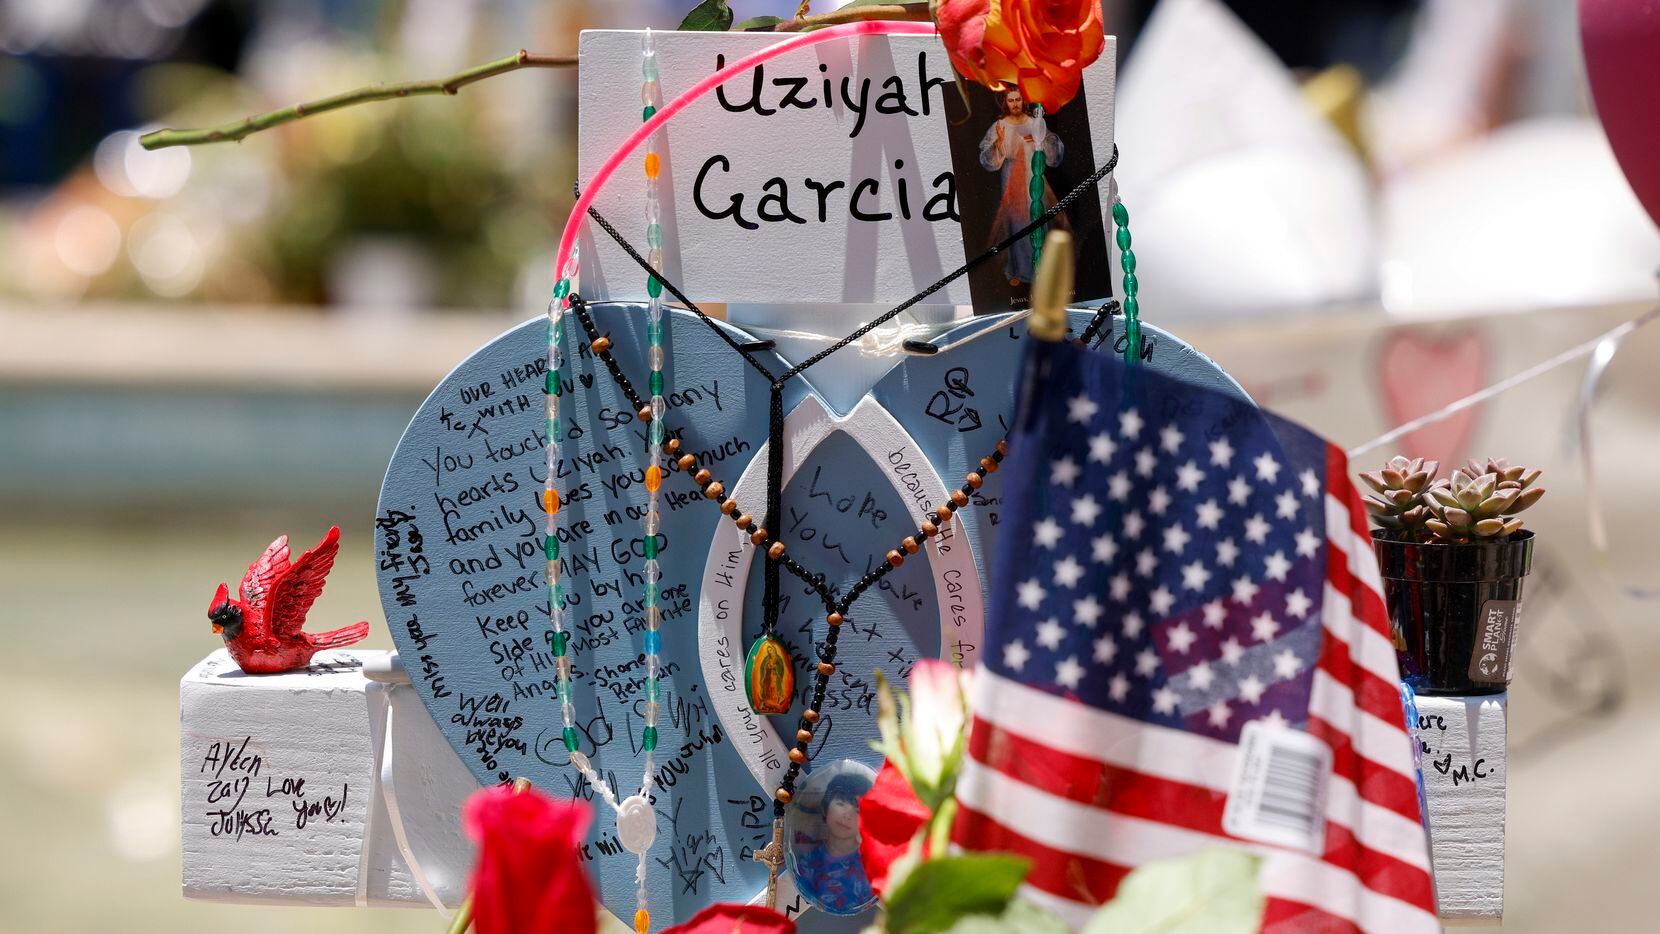 A memorial for Robb Elementary School shooting victim Uziyah Garcia, 10, at the town square...